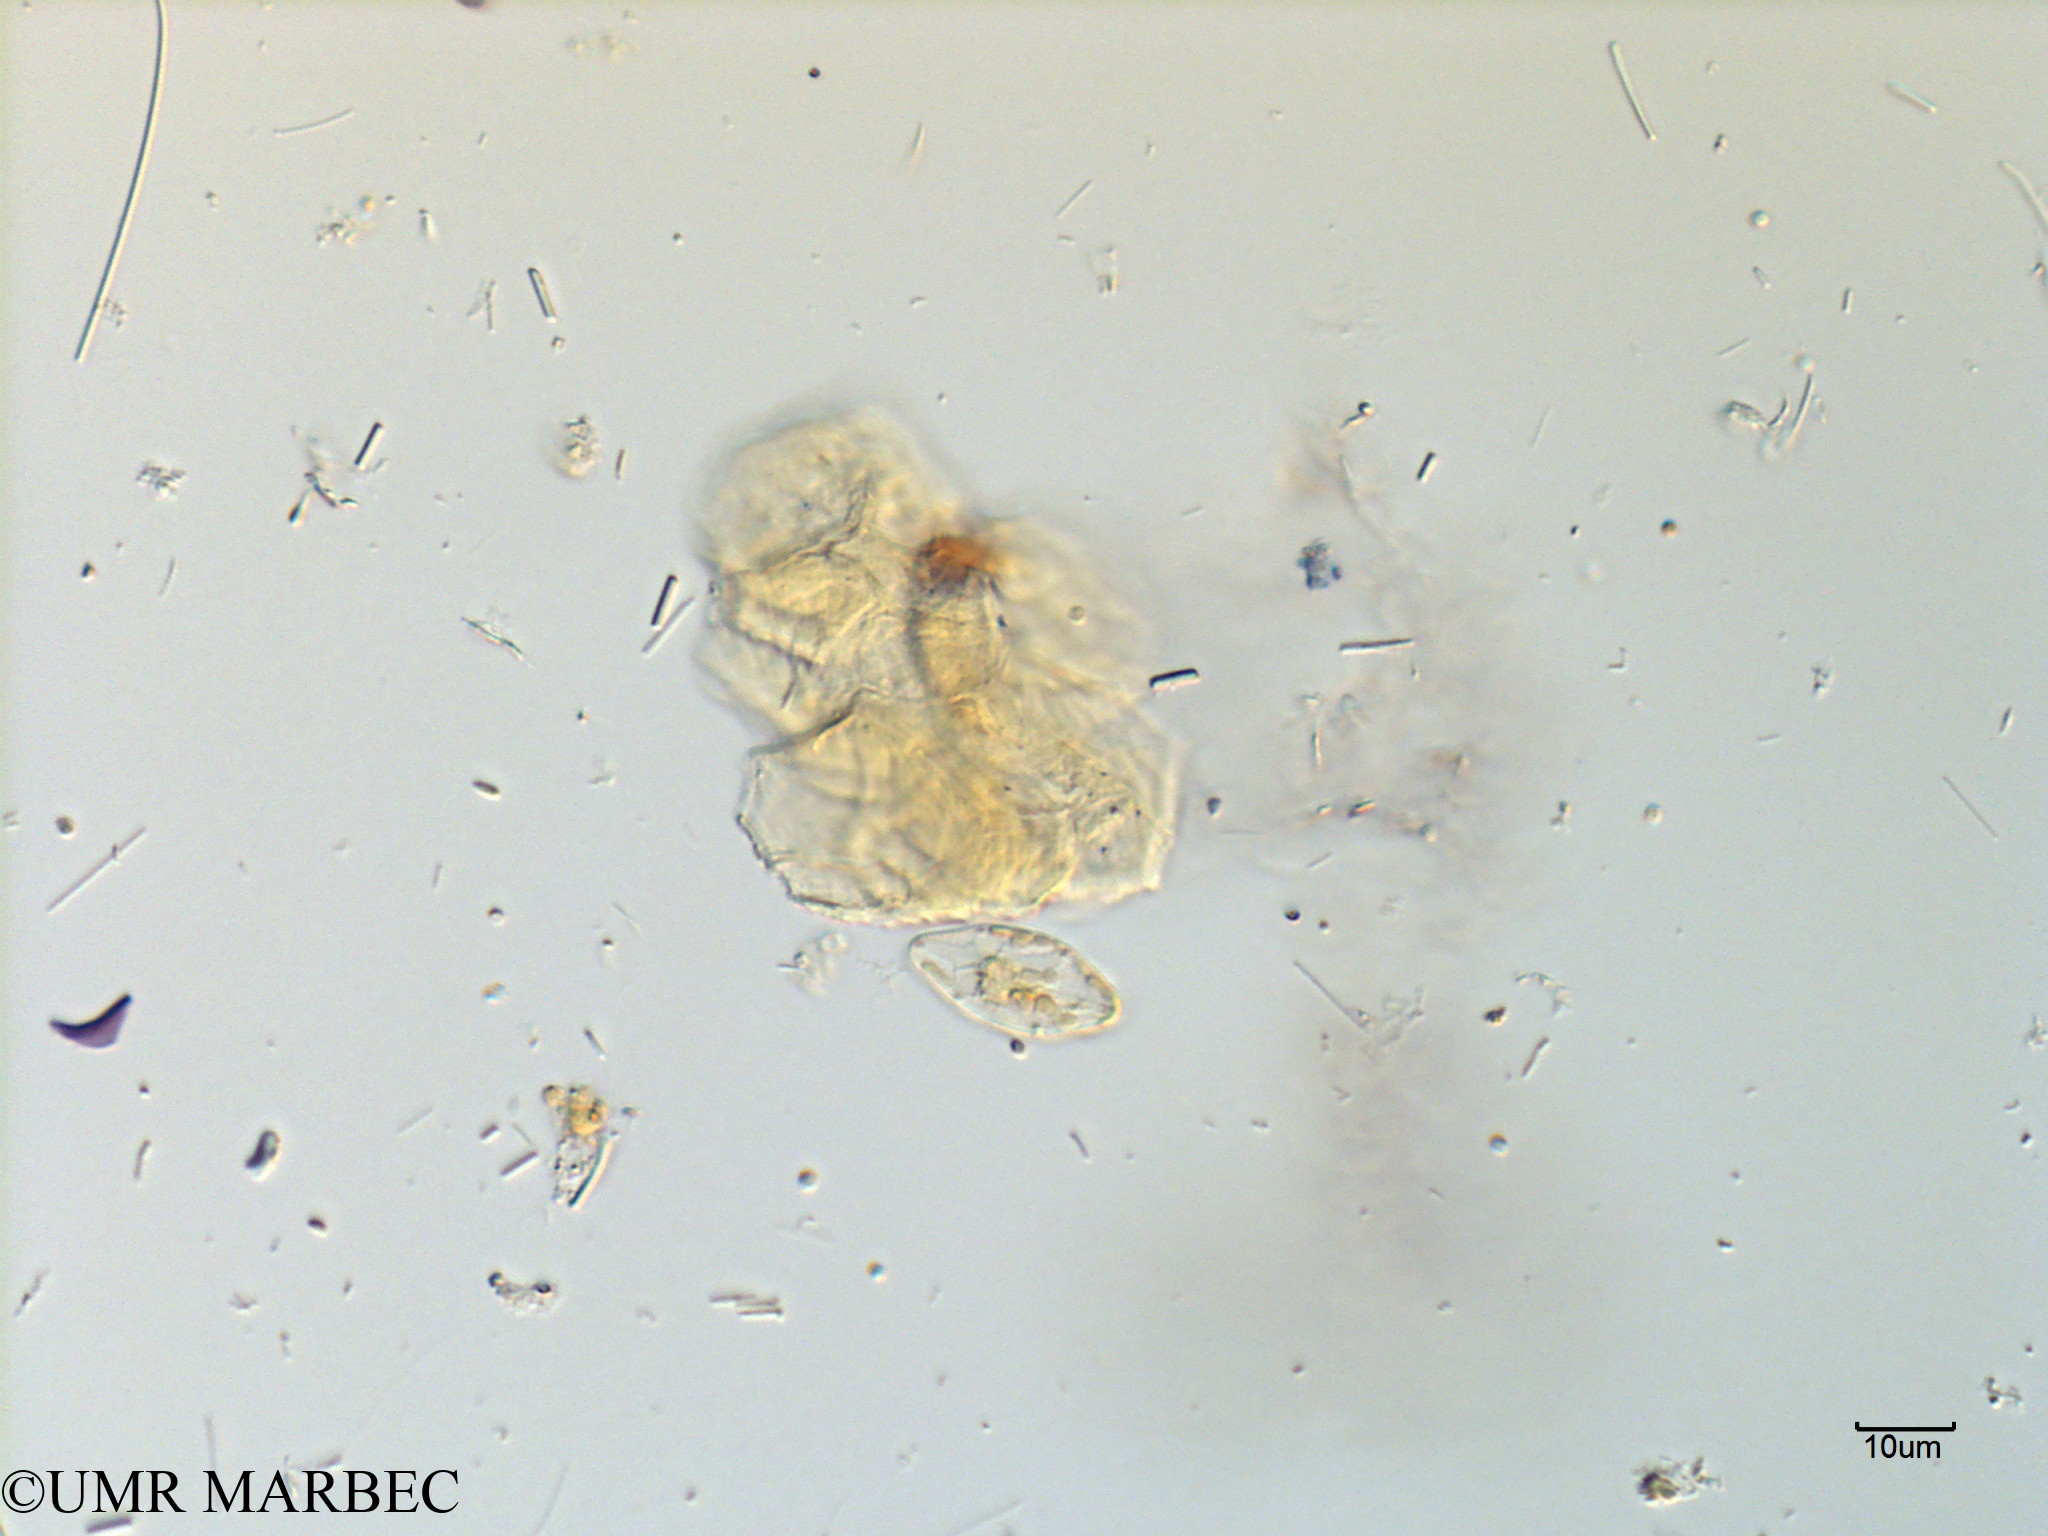 phyto/Scattered_Islands/mayotte_lagoon/SIREME May 2016/Gomphonema sp1 (MAY10_pennee laquelle c-1).tif(copy).jpg